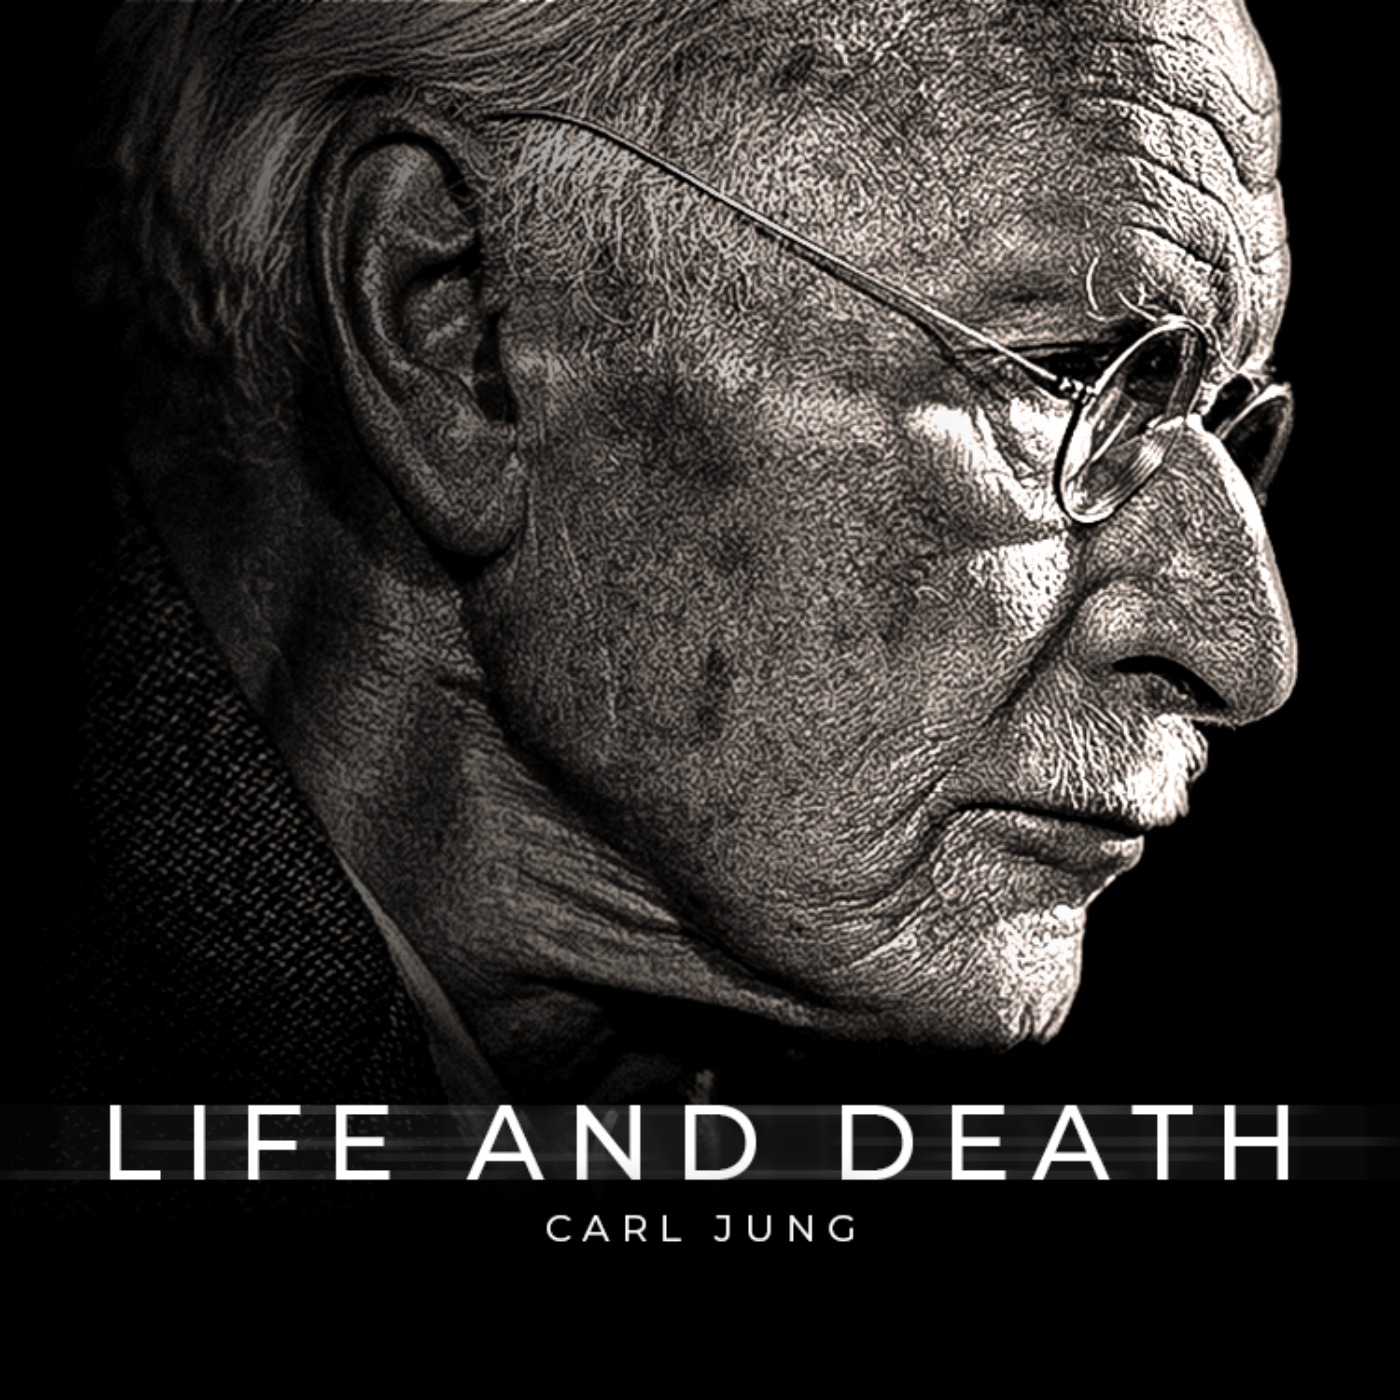 Carl Jung's Life Lessons Will Change Your Future - Life's Beautiful Mystery